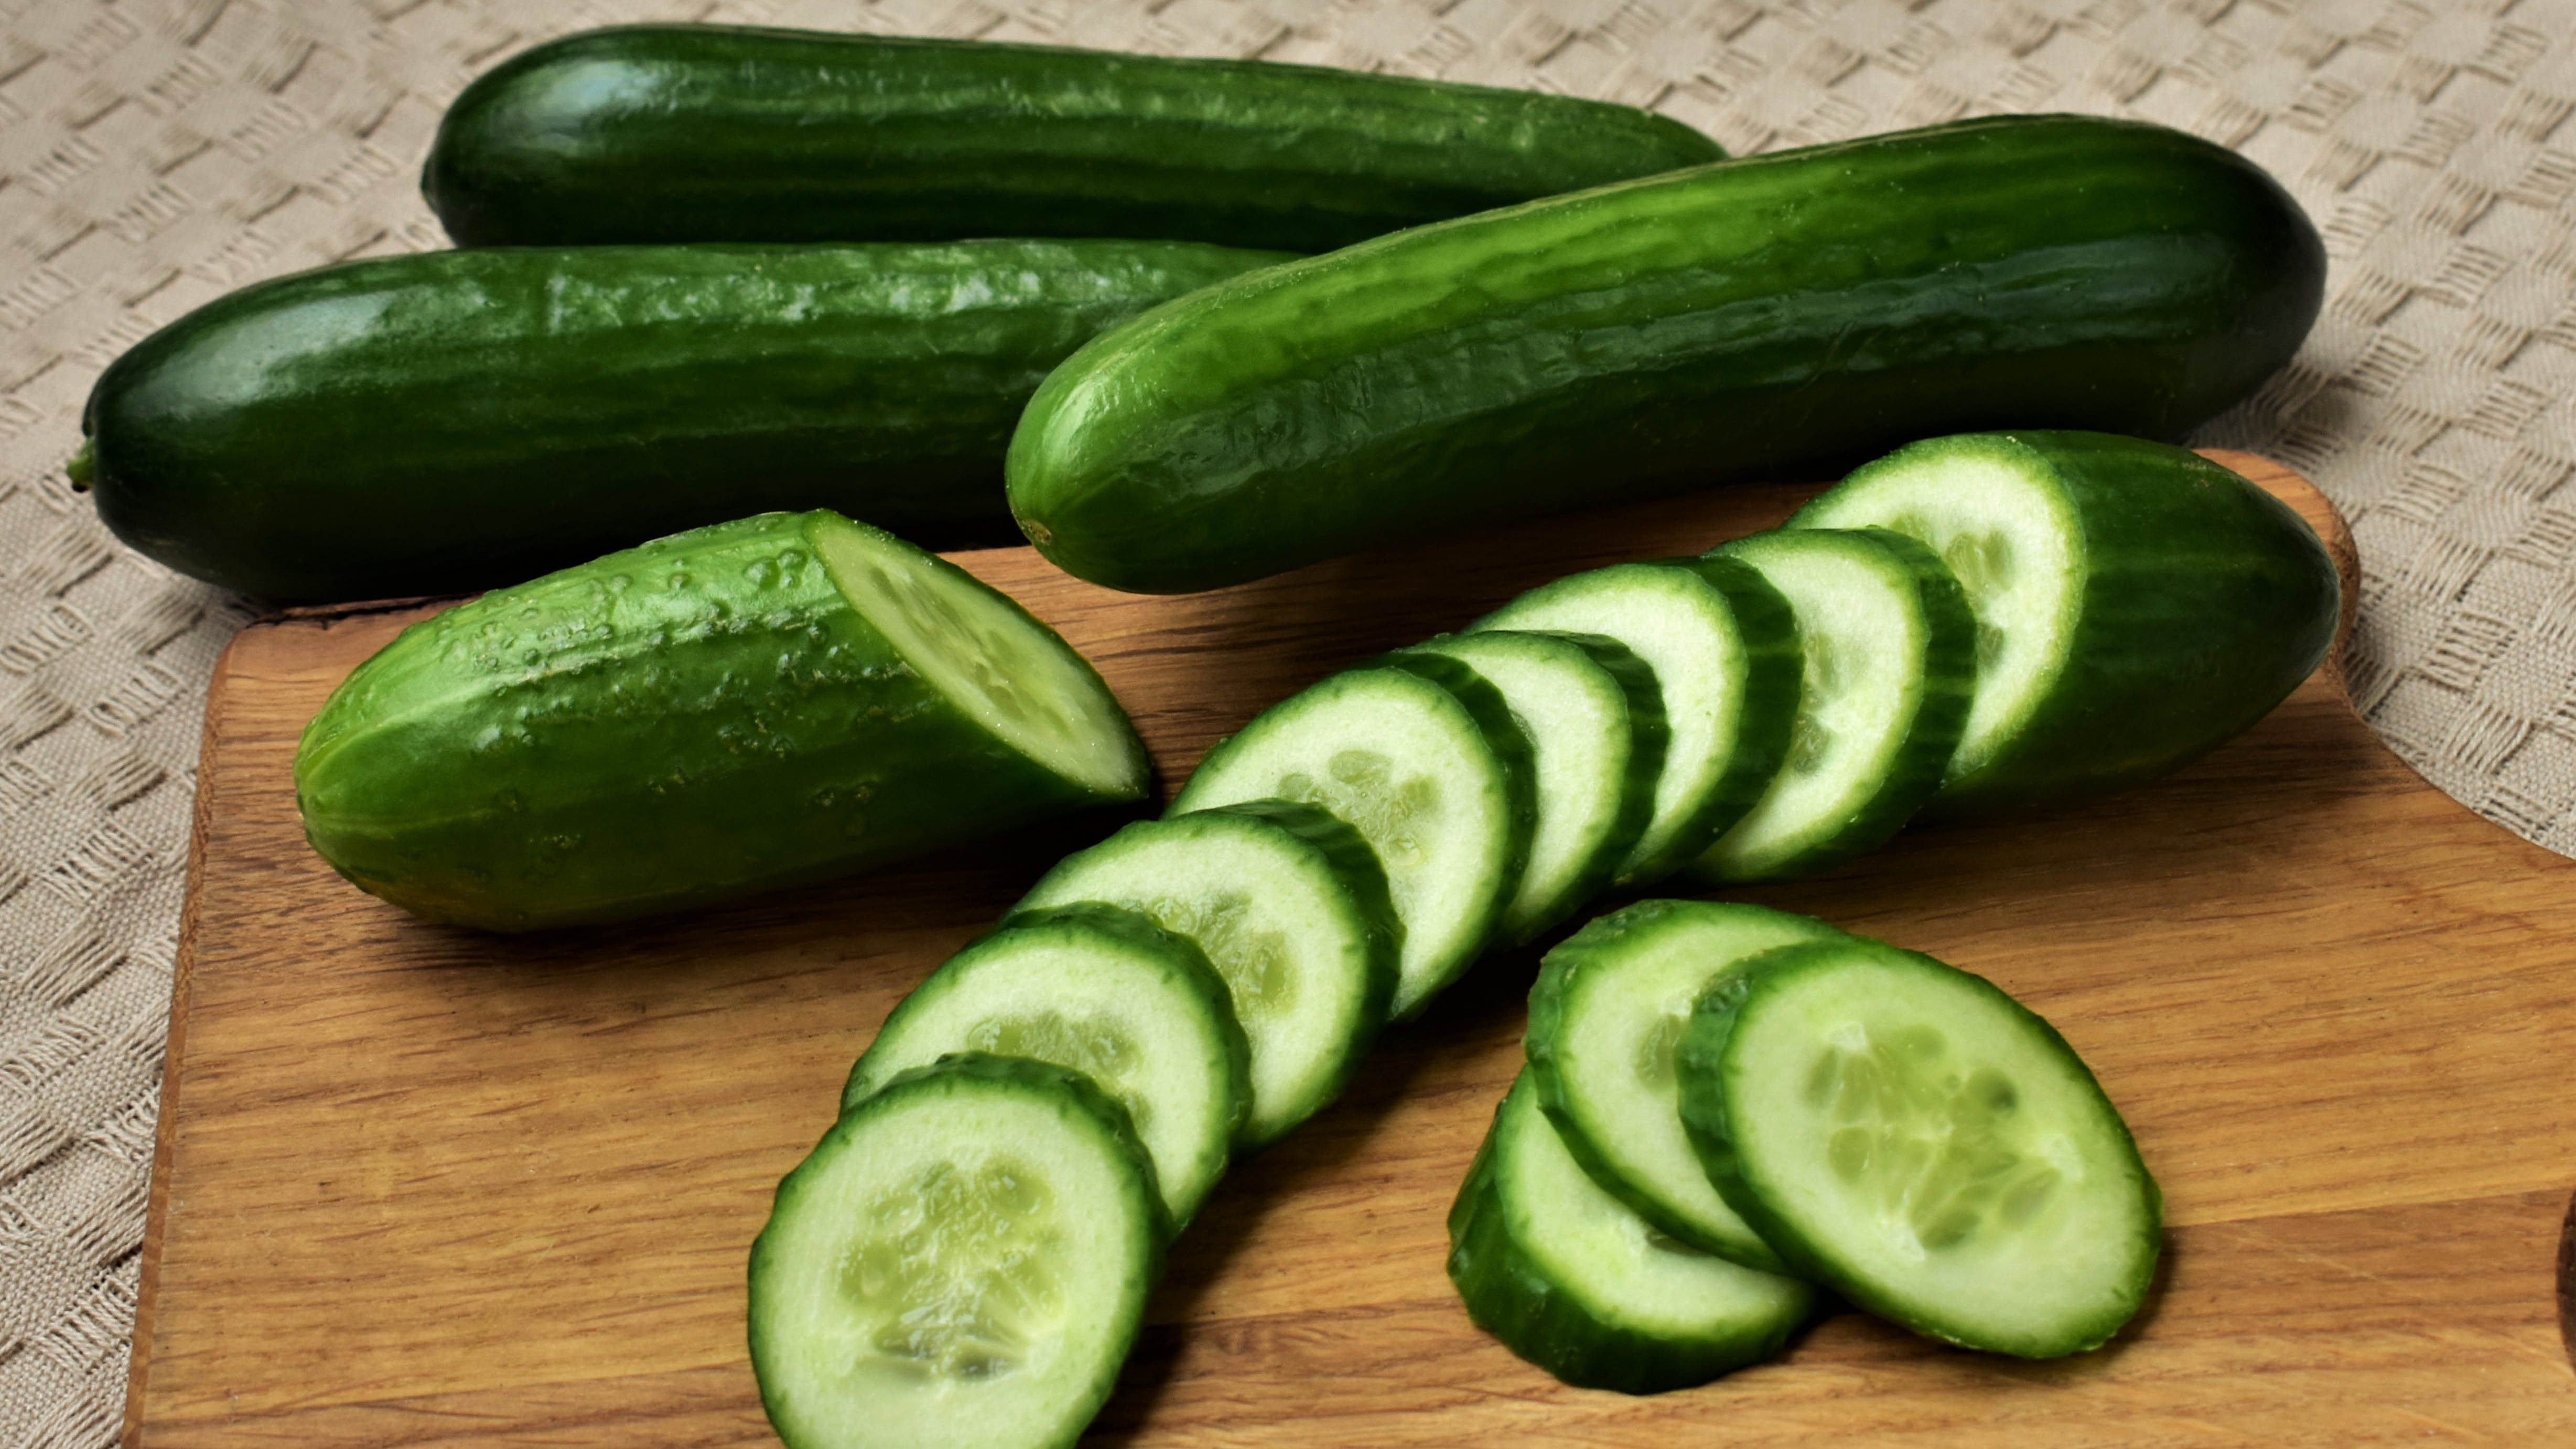 Four cucumbers on a cutting board, one of which has been cut into slices